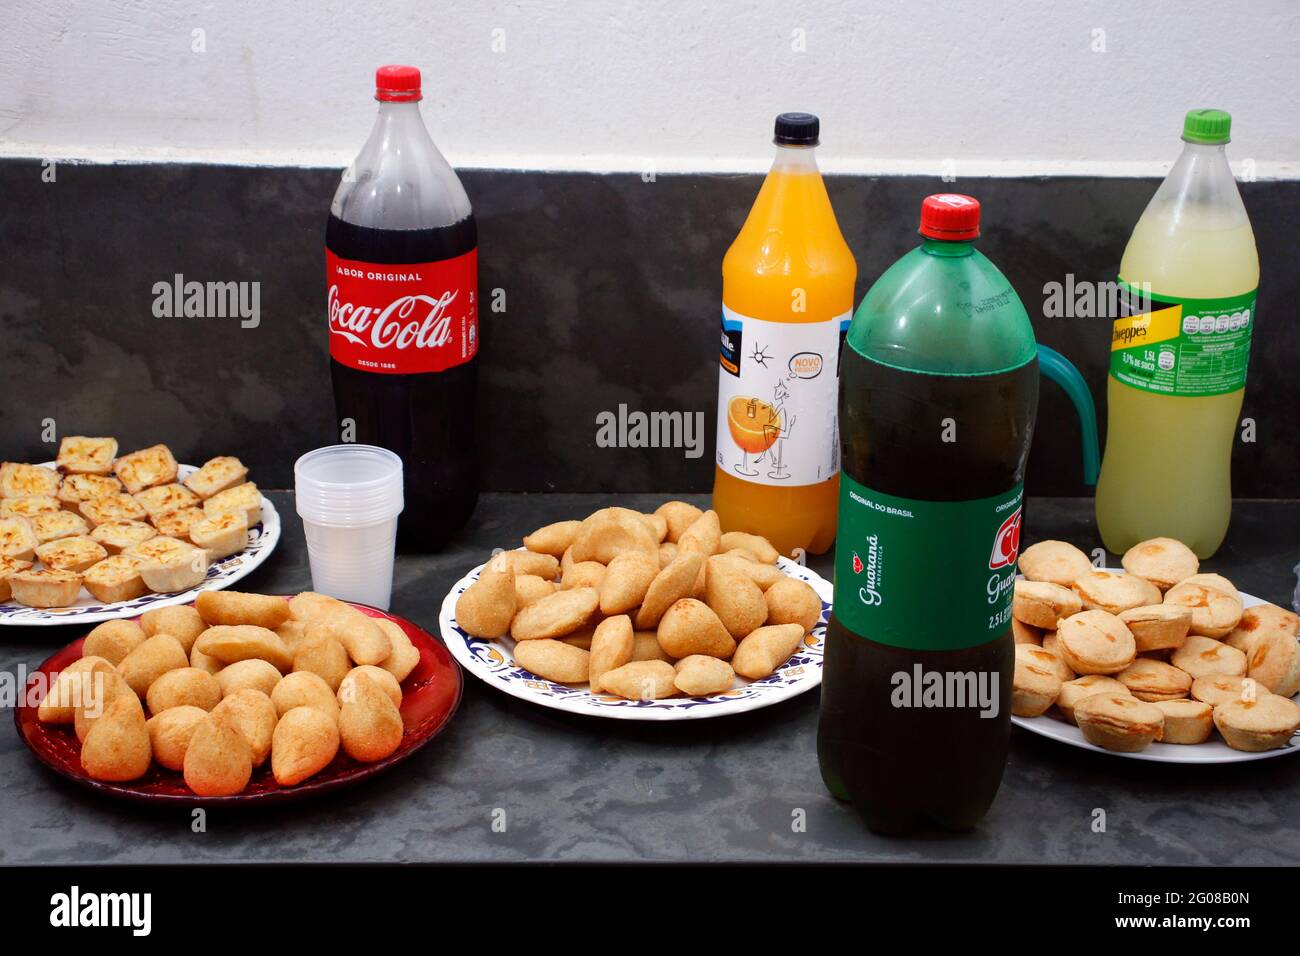 Minas Gerais, Brazil - May 30, 2021: party table with savory snacks and soft drinks Stock Photo